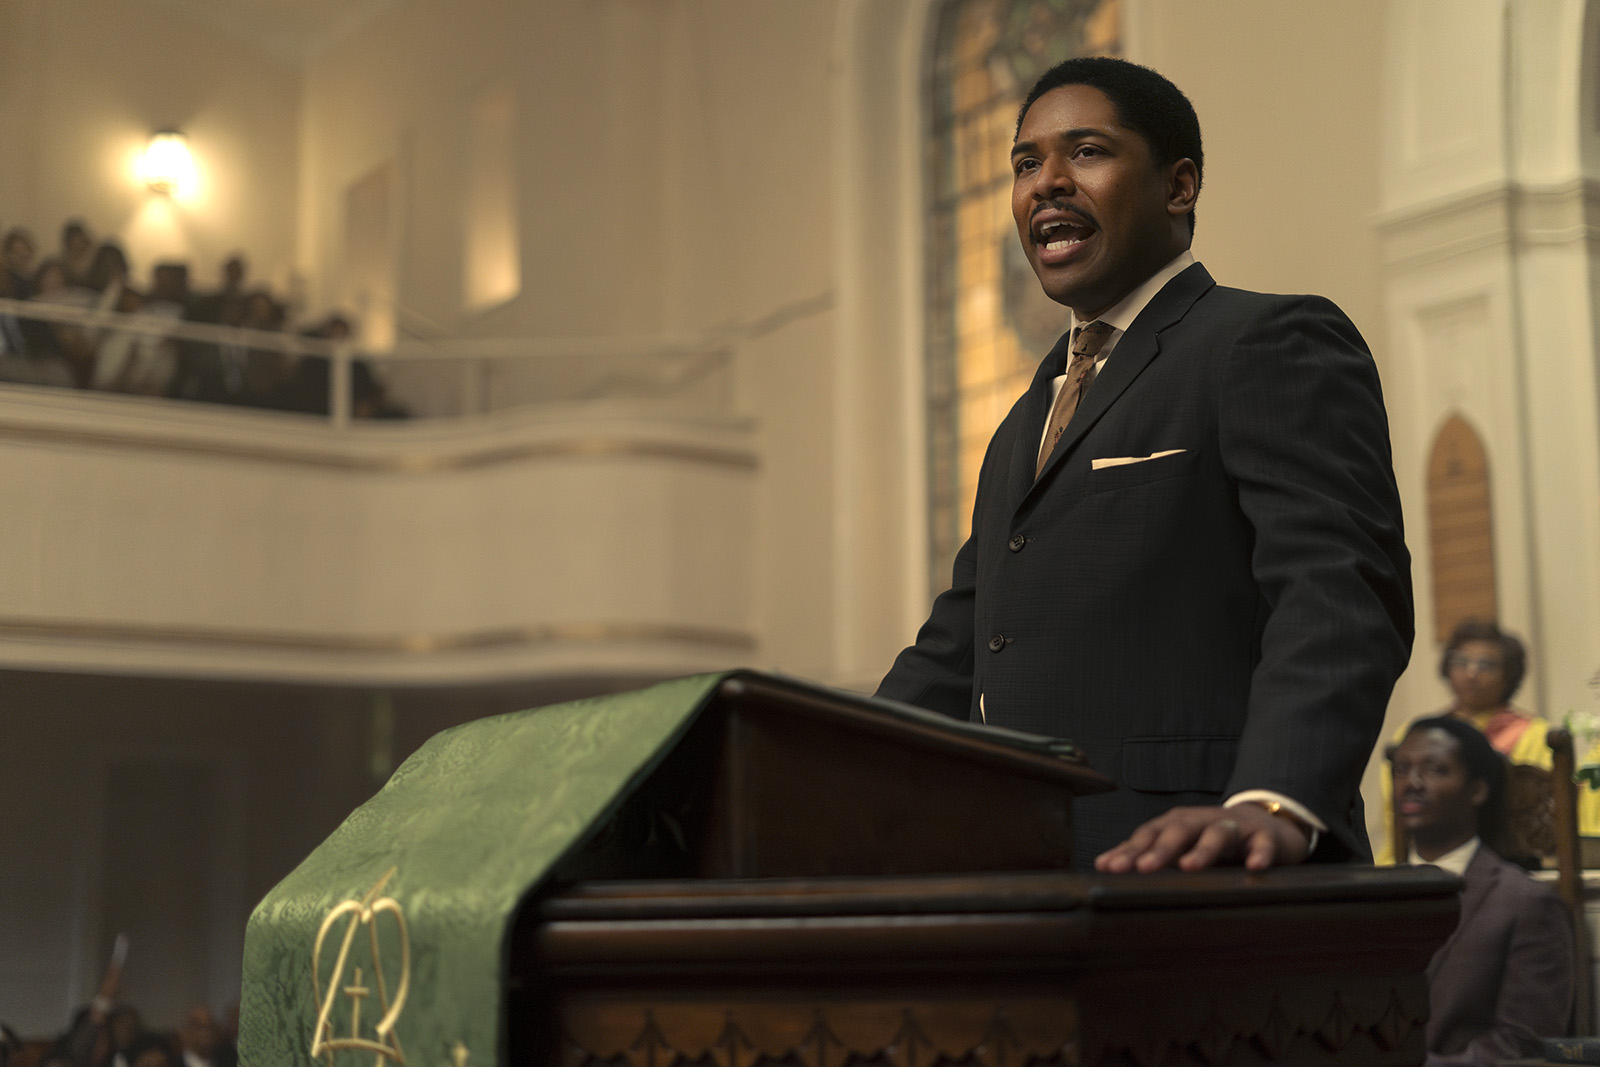 Martin Luther King Jr., played by Kelvin Harrison Jr., preaches in "Genius: MLK/X." (National Geographic/Richard DuCree)